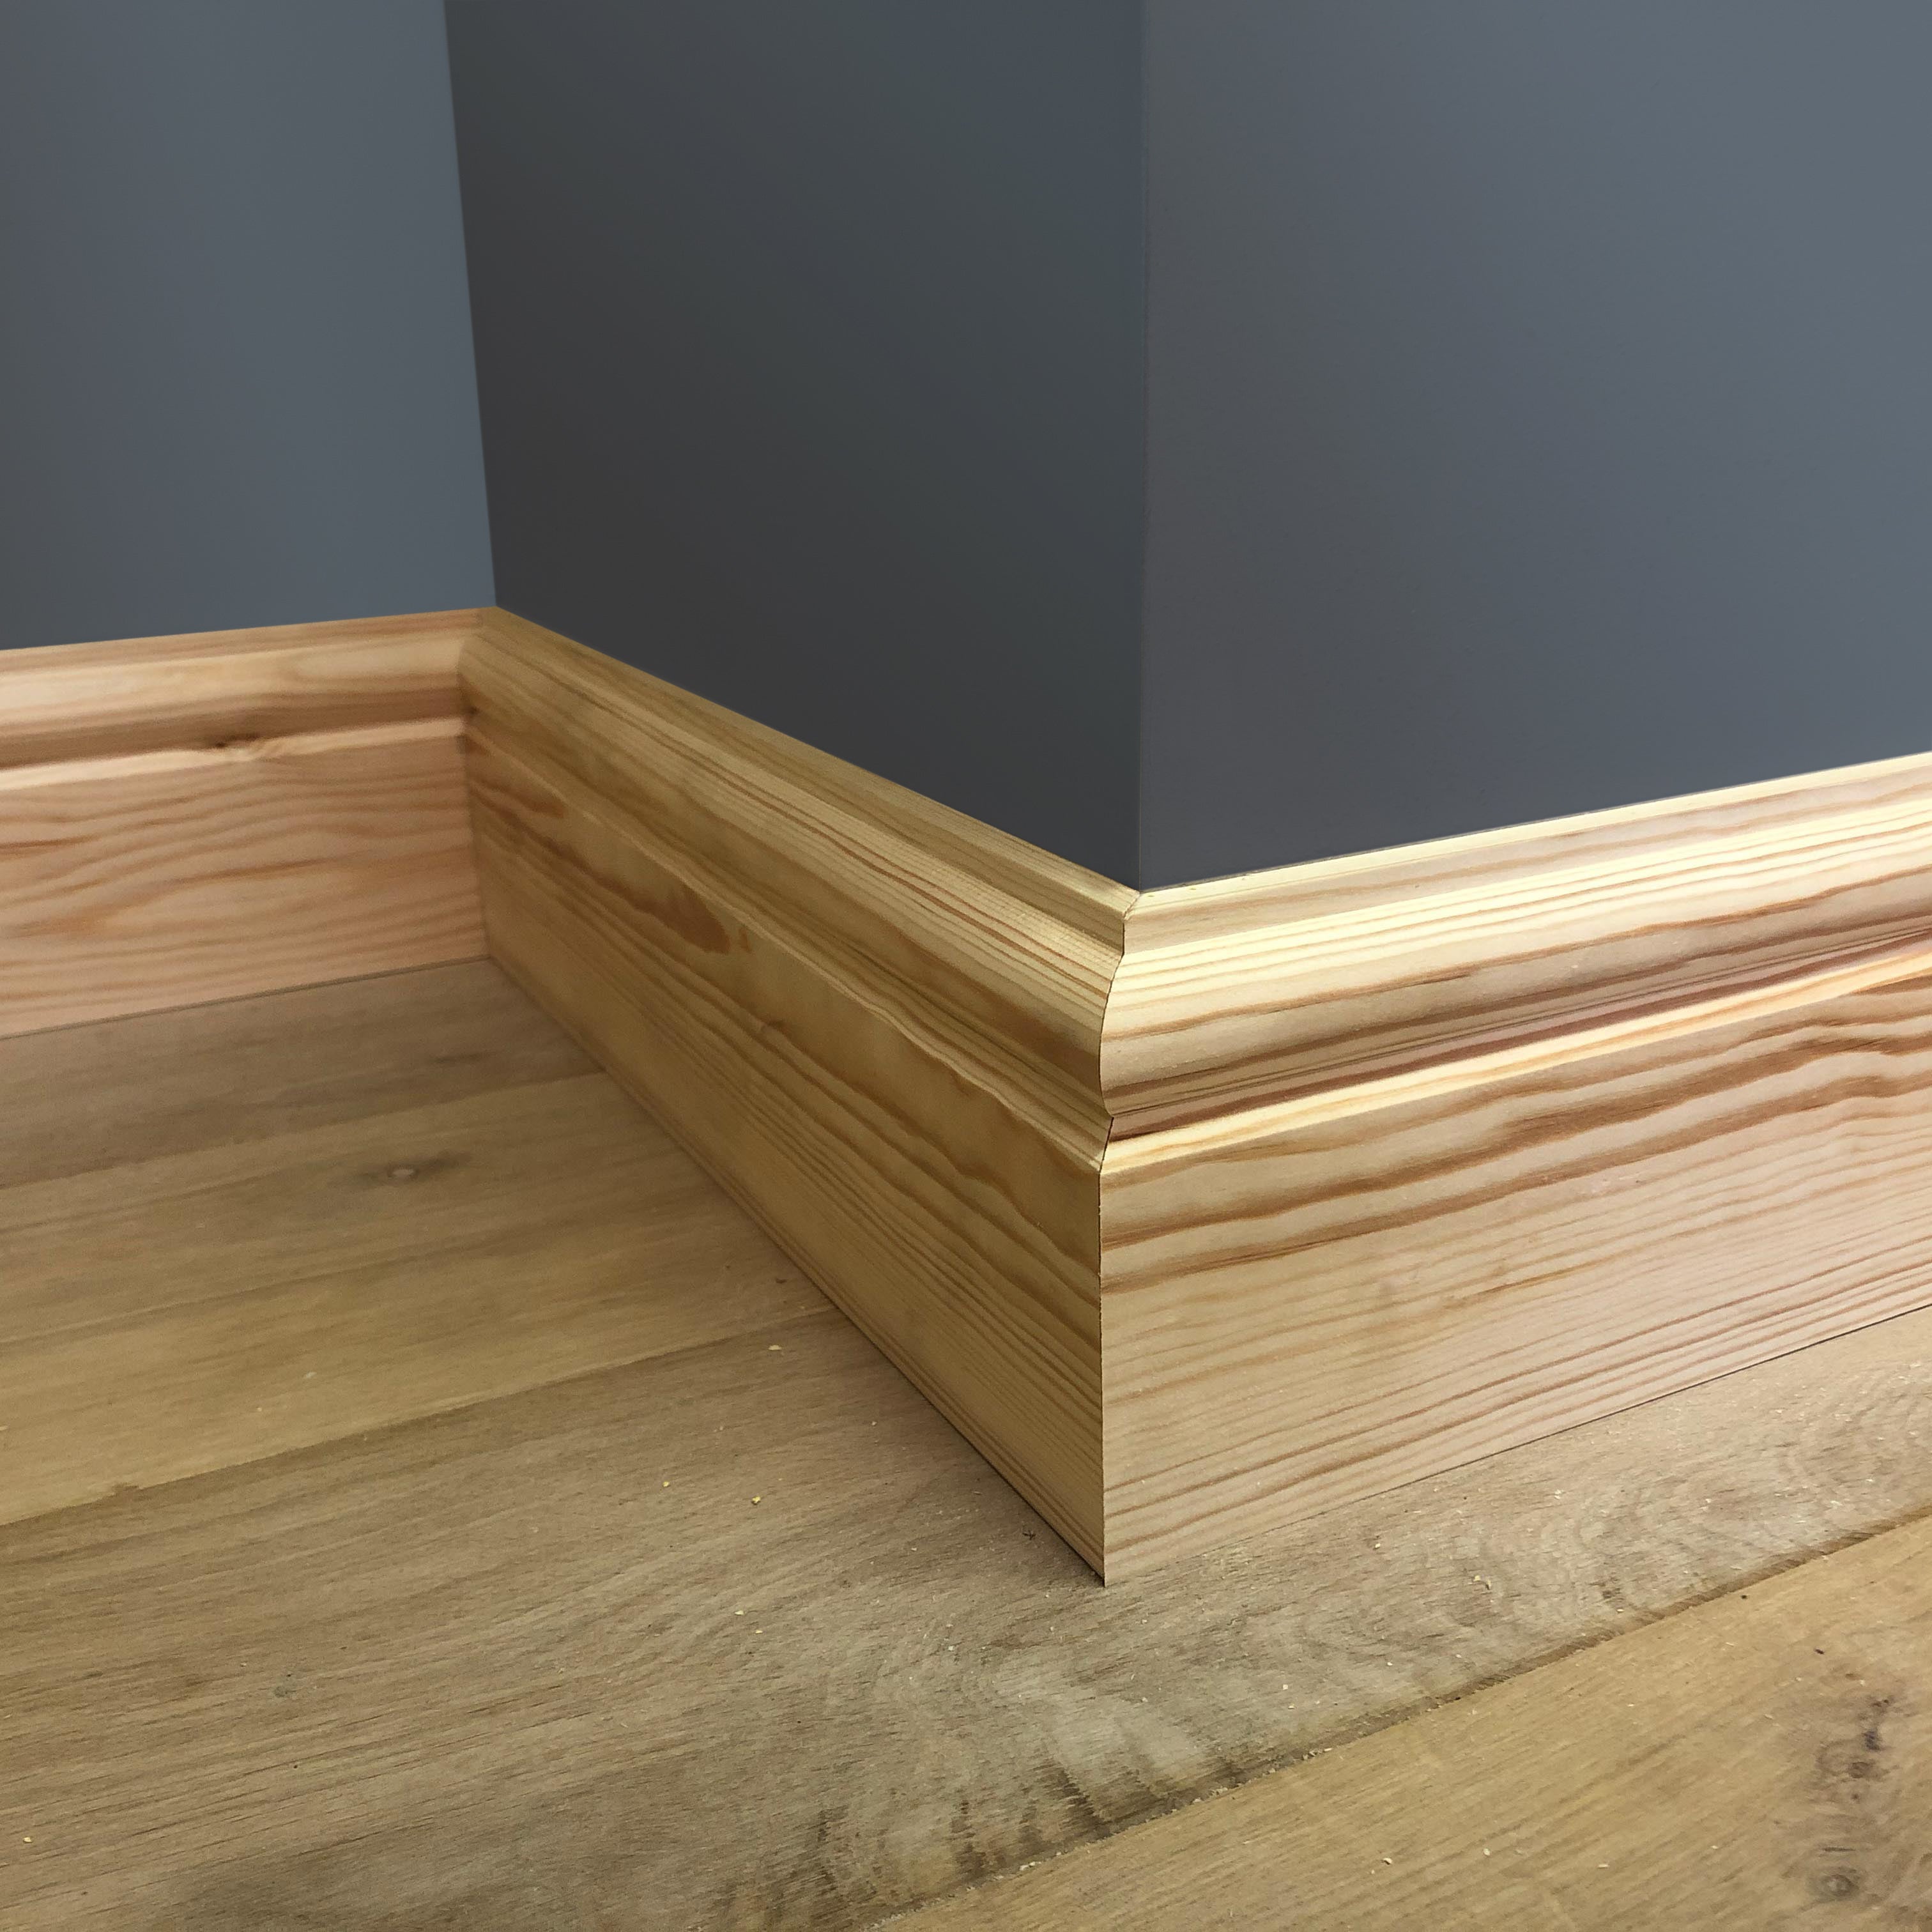 HOW TO INSTALL SKIRTING BOARDS